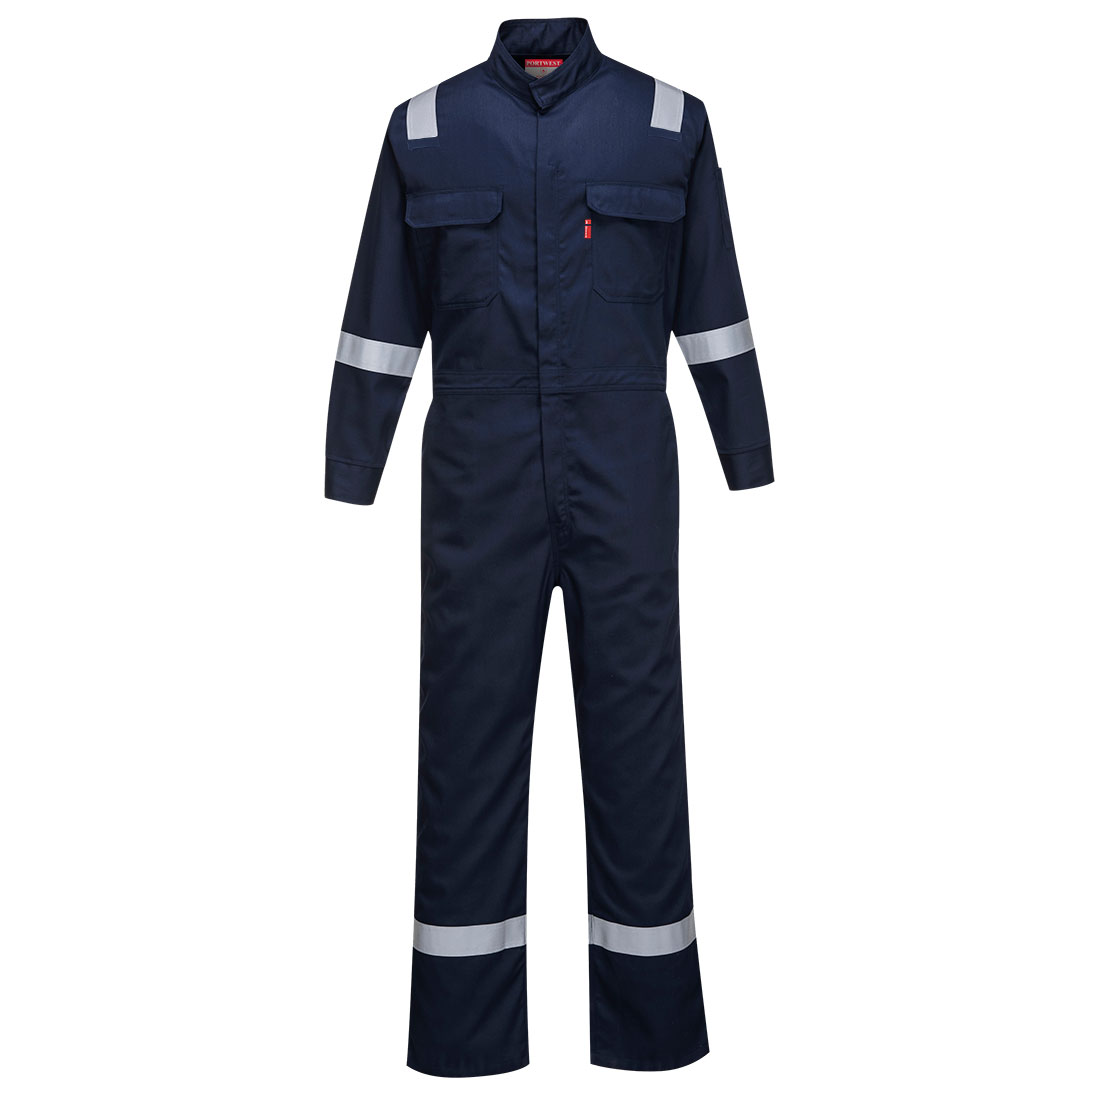 FR94 Portwest® Bizflame® 88/12 Iona Flame Resistant Work Coveralls - Navy